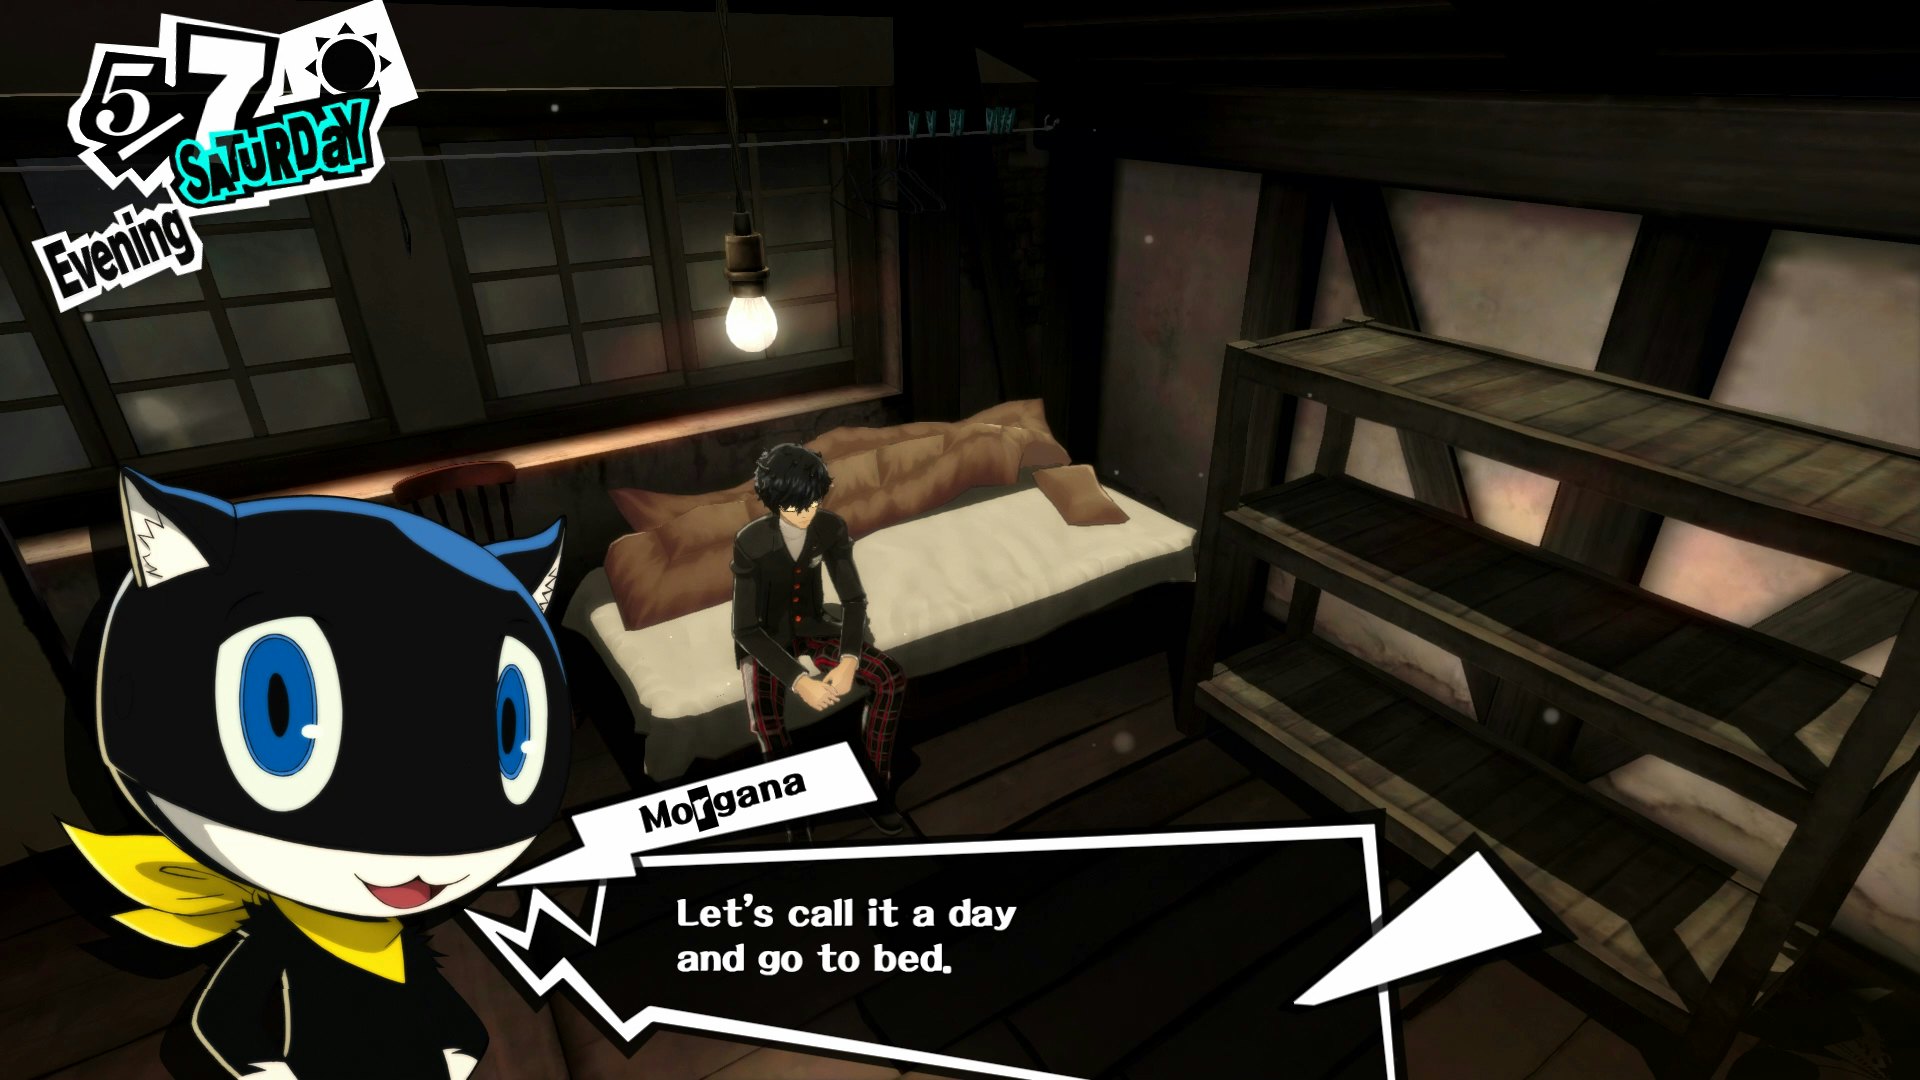 persona 5 where to buy video games